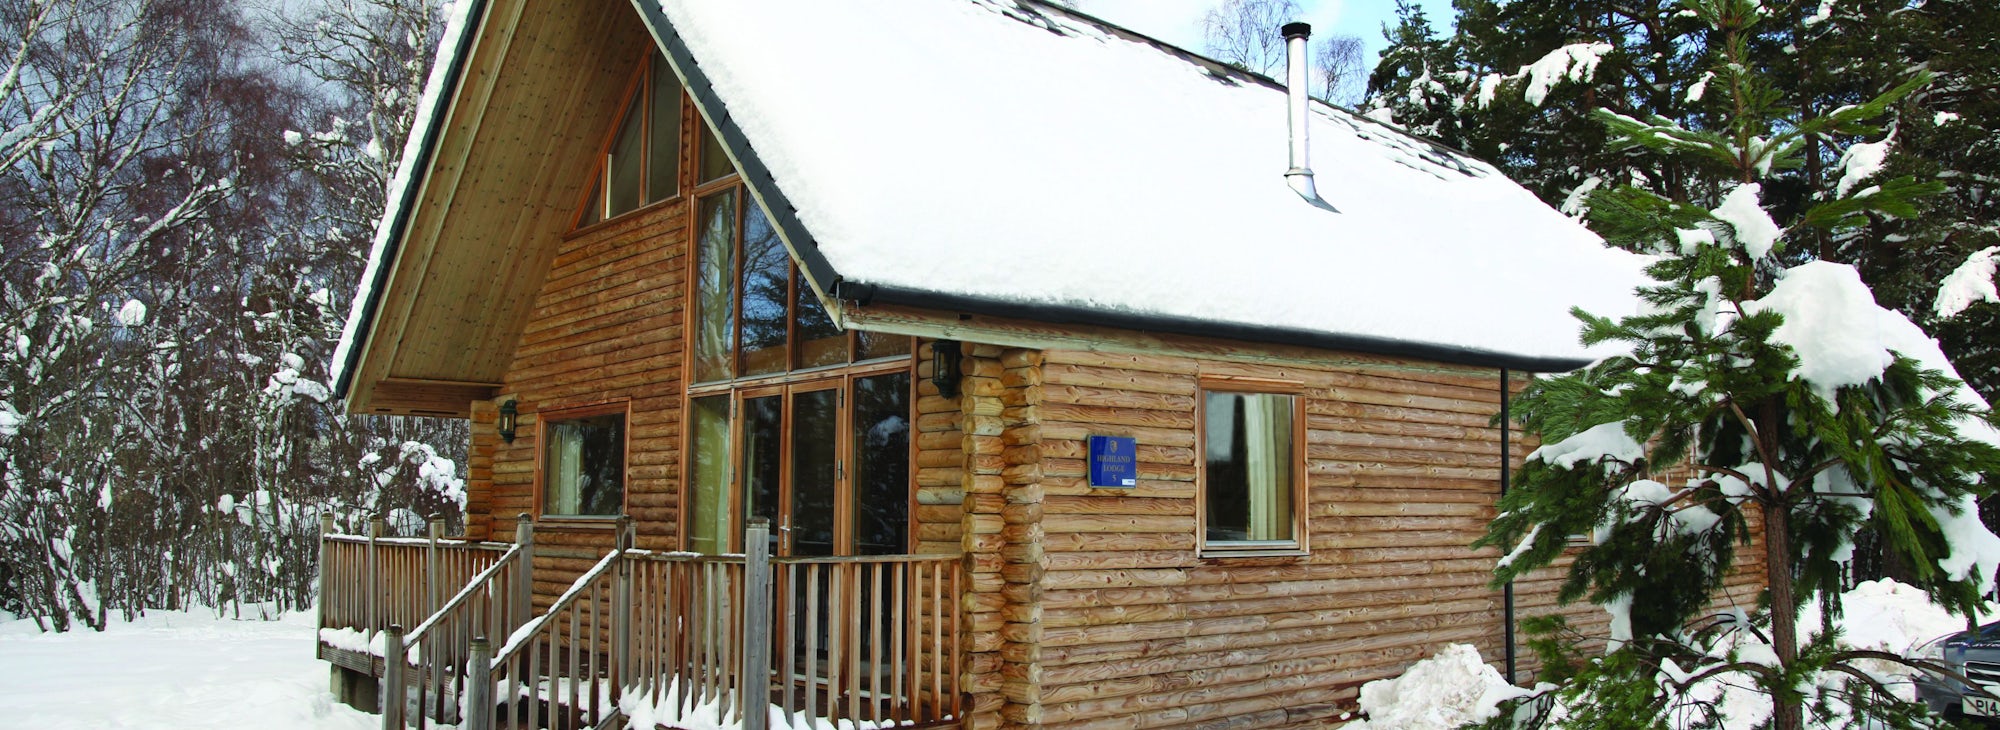 Self-catering lodge